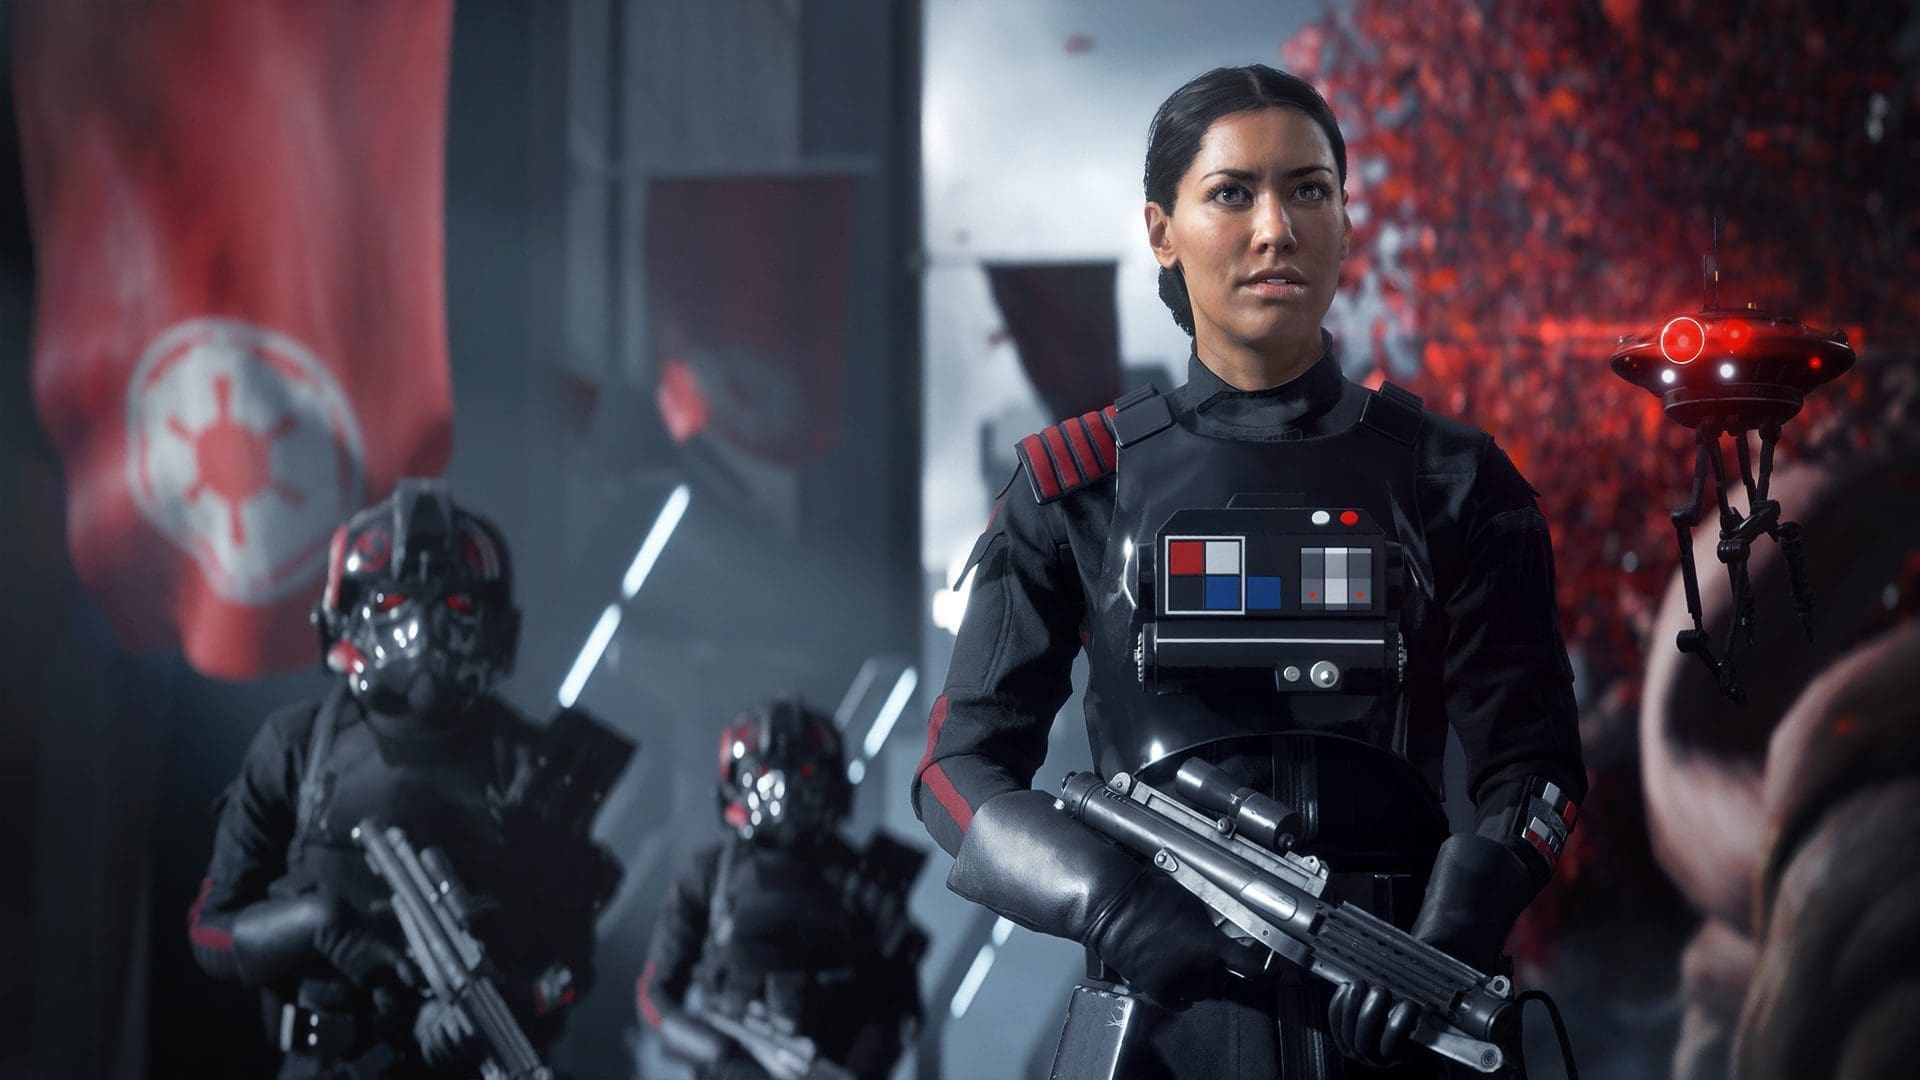 Battlefront II, Criterion, Dice, EA Games, gaming news, lucasfilm, Motive, Origin, Playstation 4, star wars, Star Wars Battlefront II, Star Wars Celebration, Xbox One